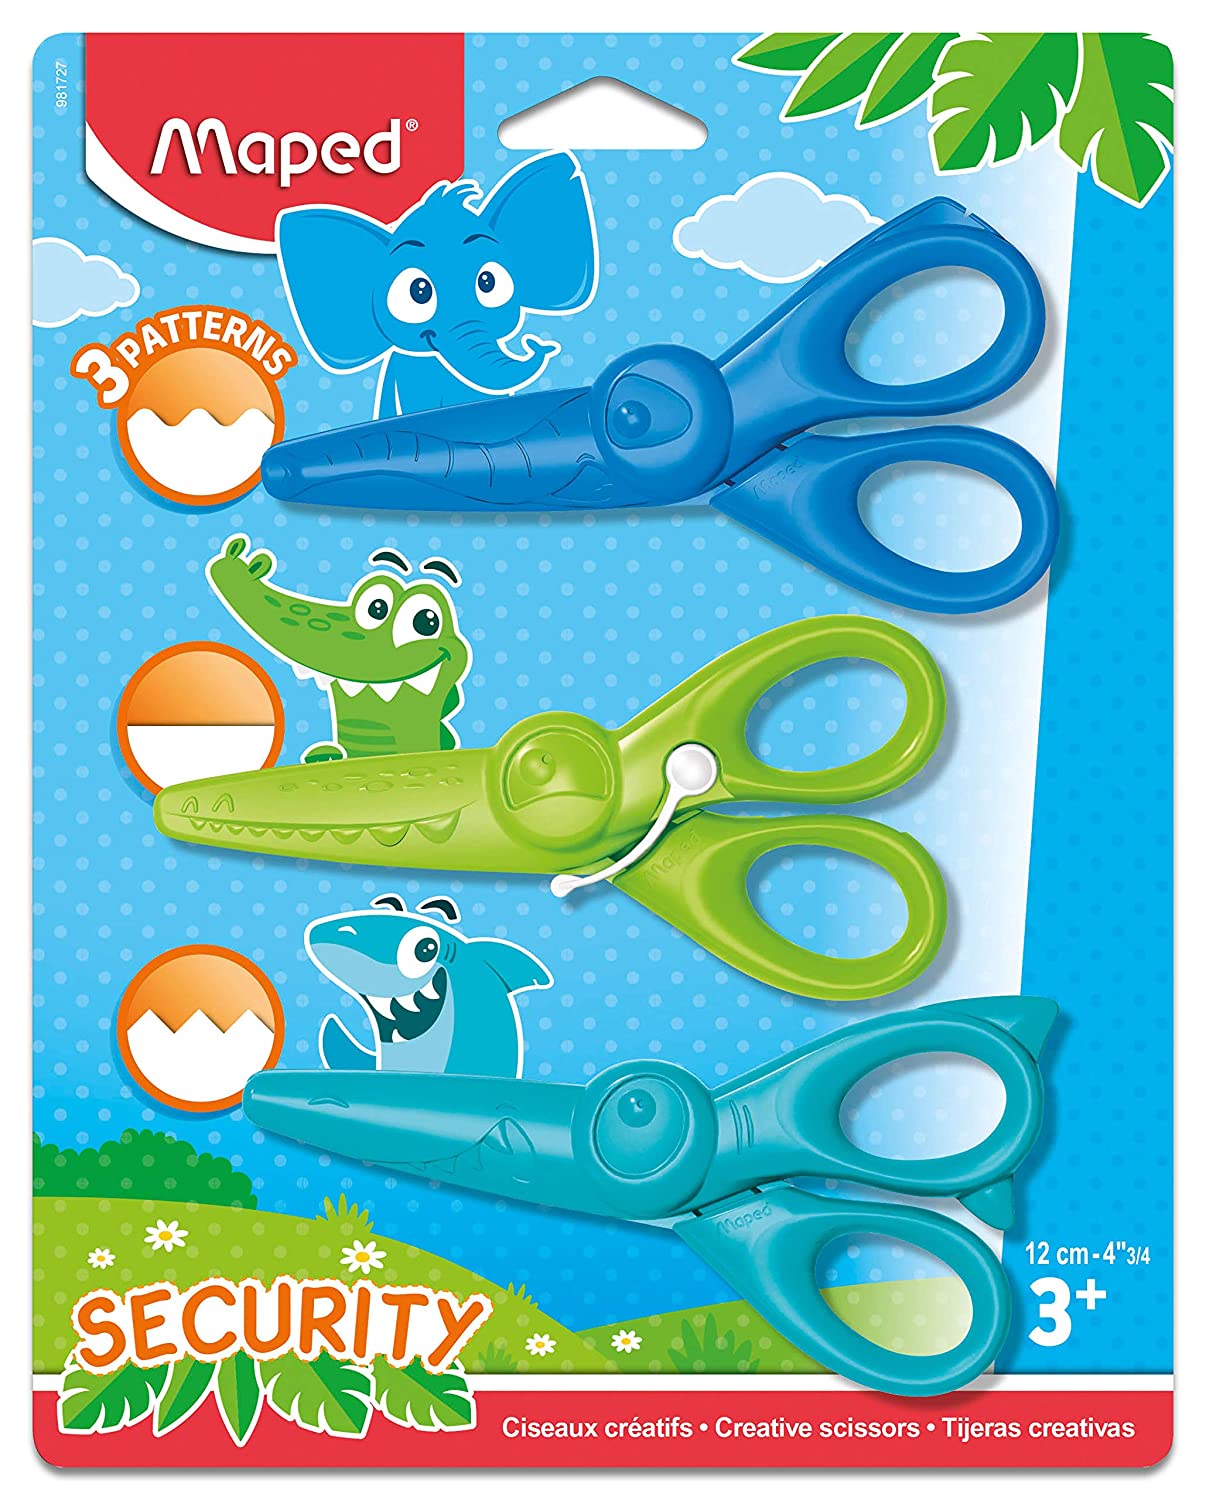 Maped Kidicraft Childrens Safety Craft Scissors (Pack of 3) Zig Zag, Curves & Straight Cut